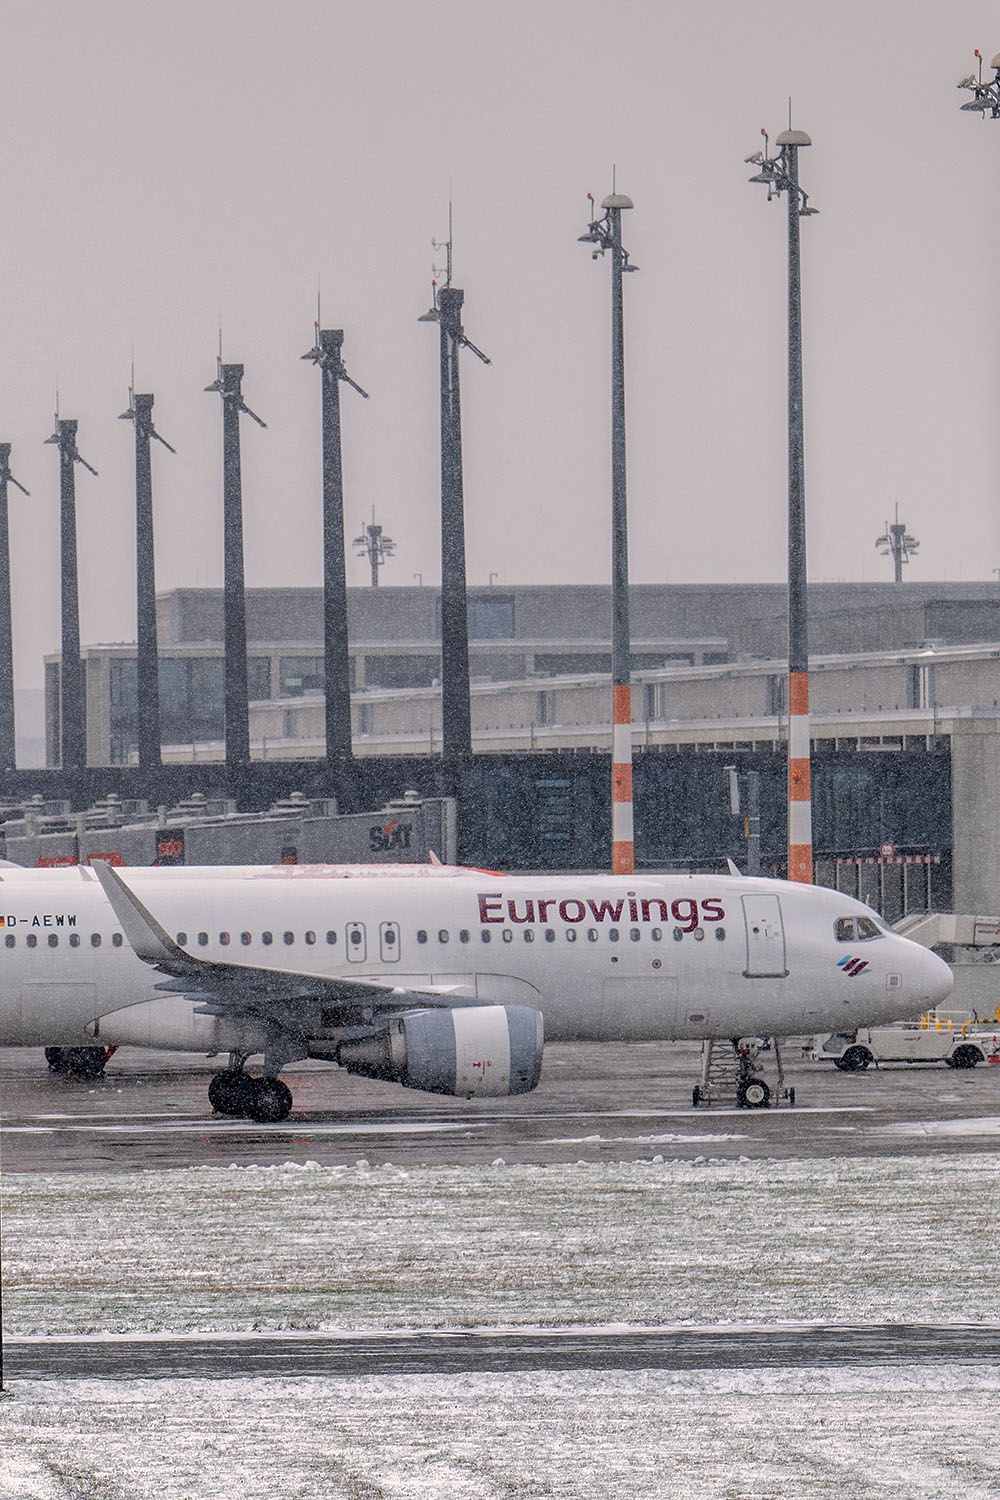 The far north with Eurowings